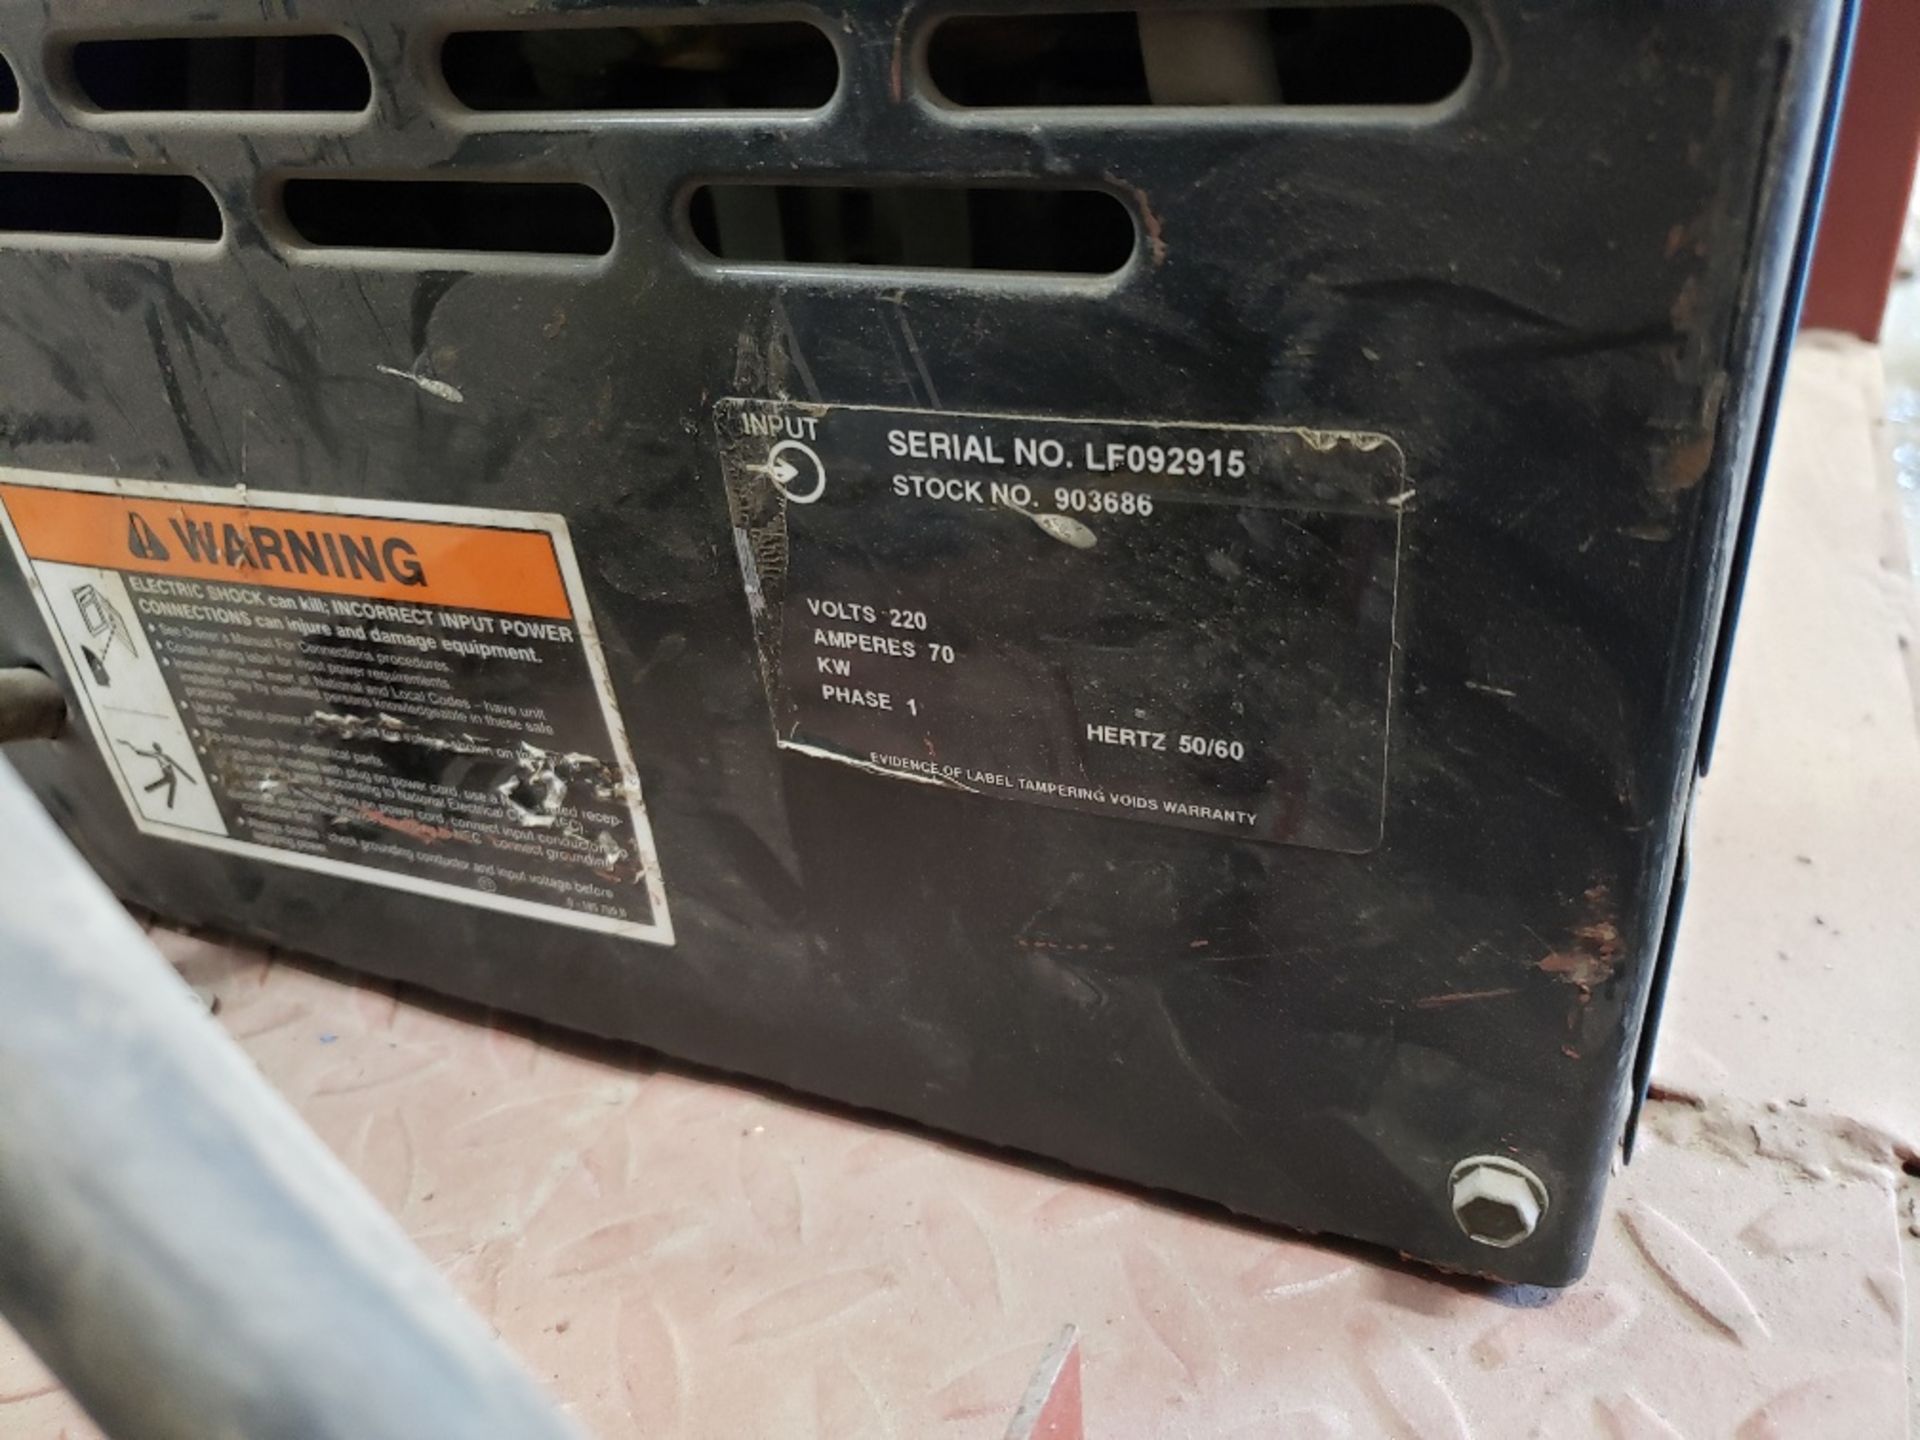 MILLER MODEL THUNDERBOLT XL 300/200 AMP AC/DC WELDING POWER SOURCE S/N LF092915, WITH HYPERTHERM - Image 2 of 9